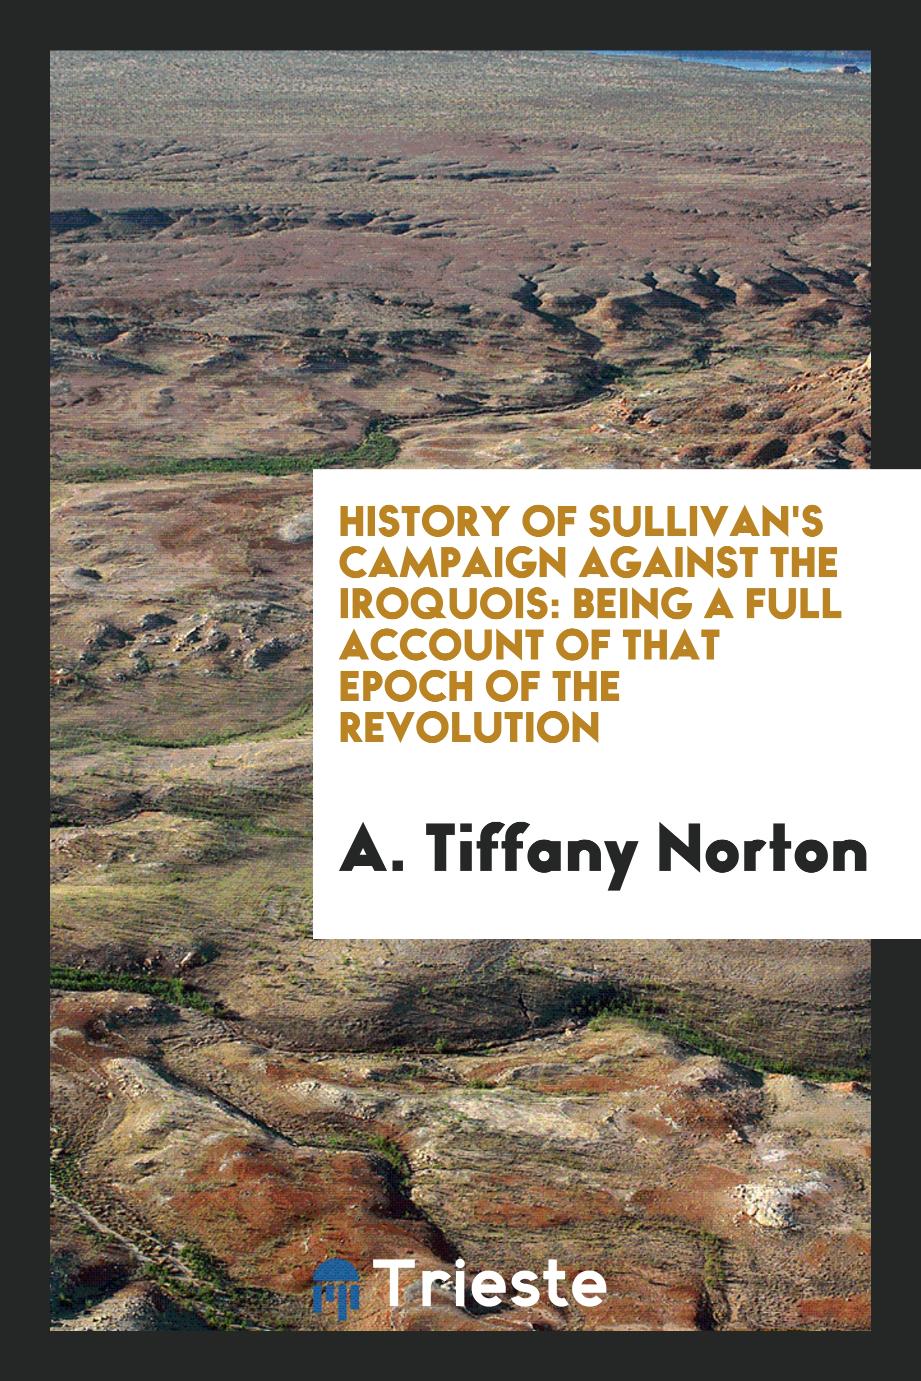 History of Sullivan's Campaign Against the Iroquois: Being a Full Account of That Epoch of the Revolution